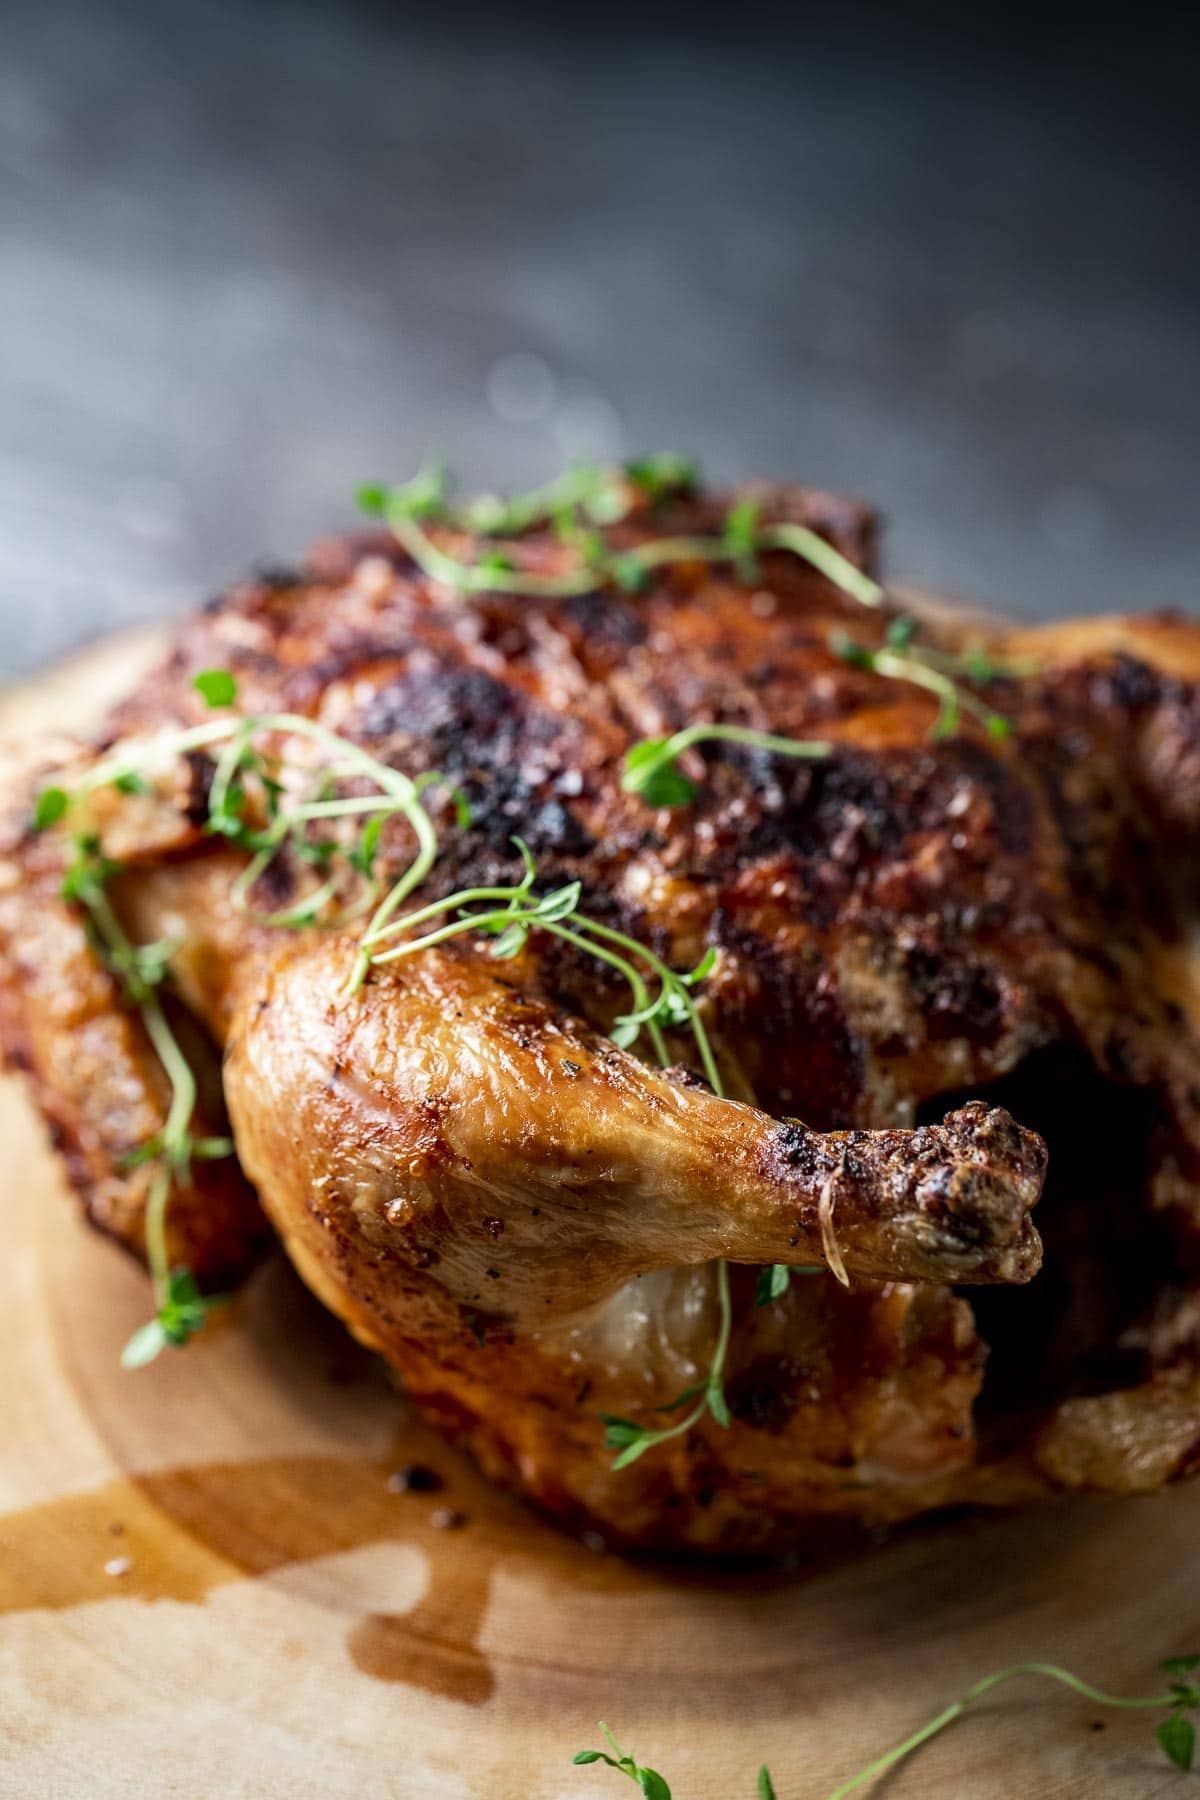 Side view of a cooked chicken on a wooden board.